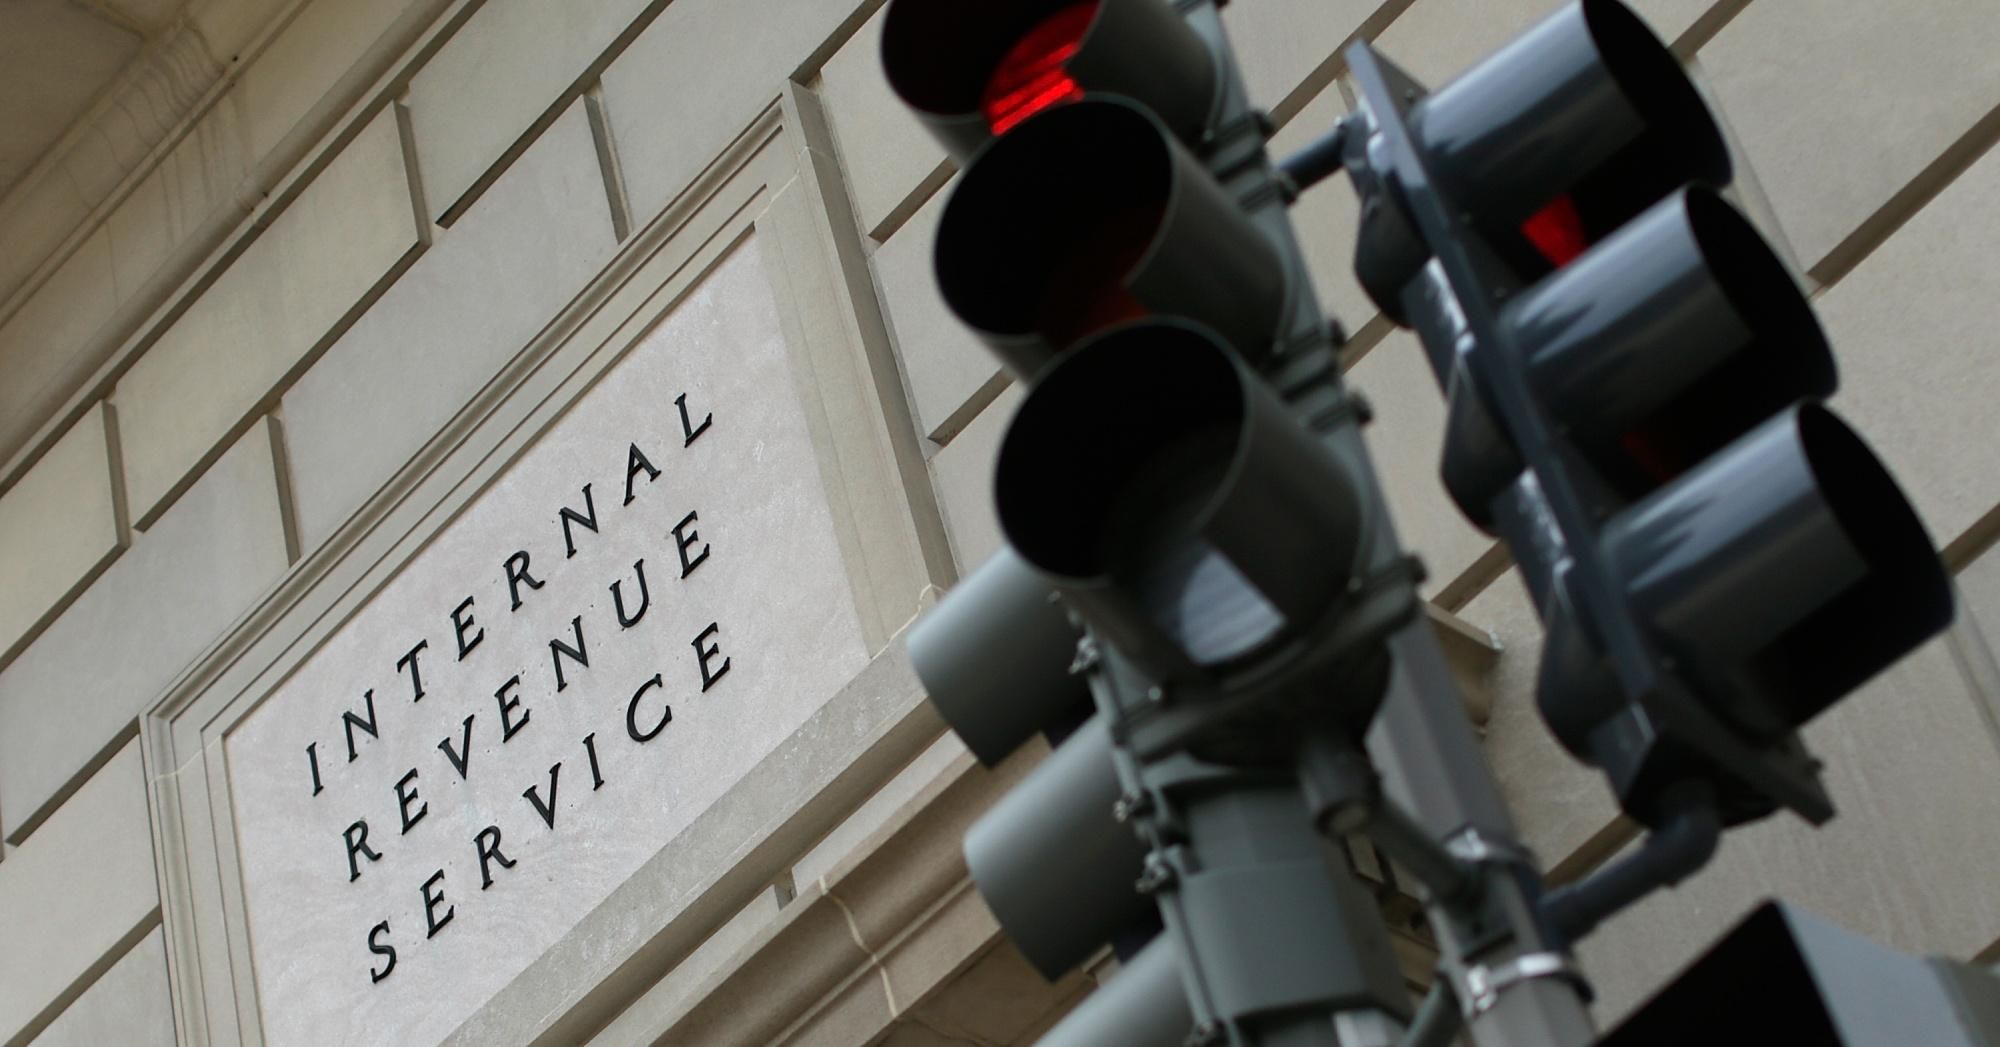 The Internal Revenue Service Building is shown on July 22, 2013 in Washington, D.C. (Photo: Win McNamee/Getty Images)